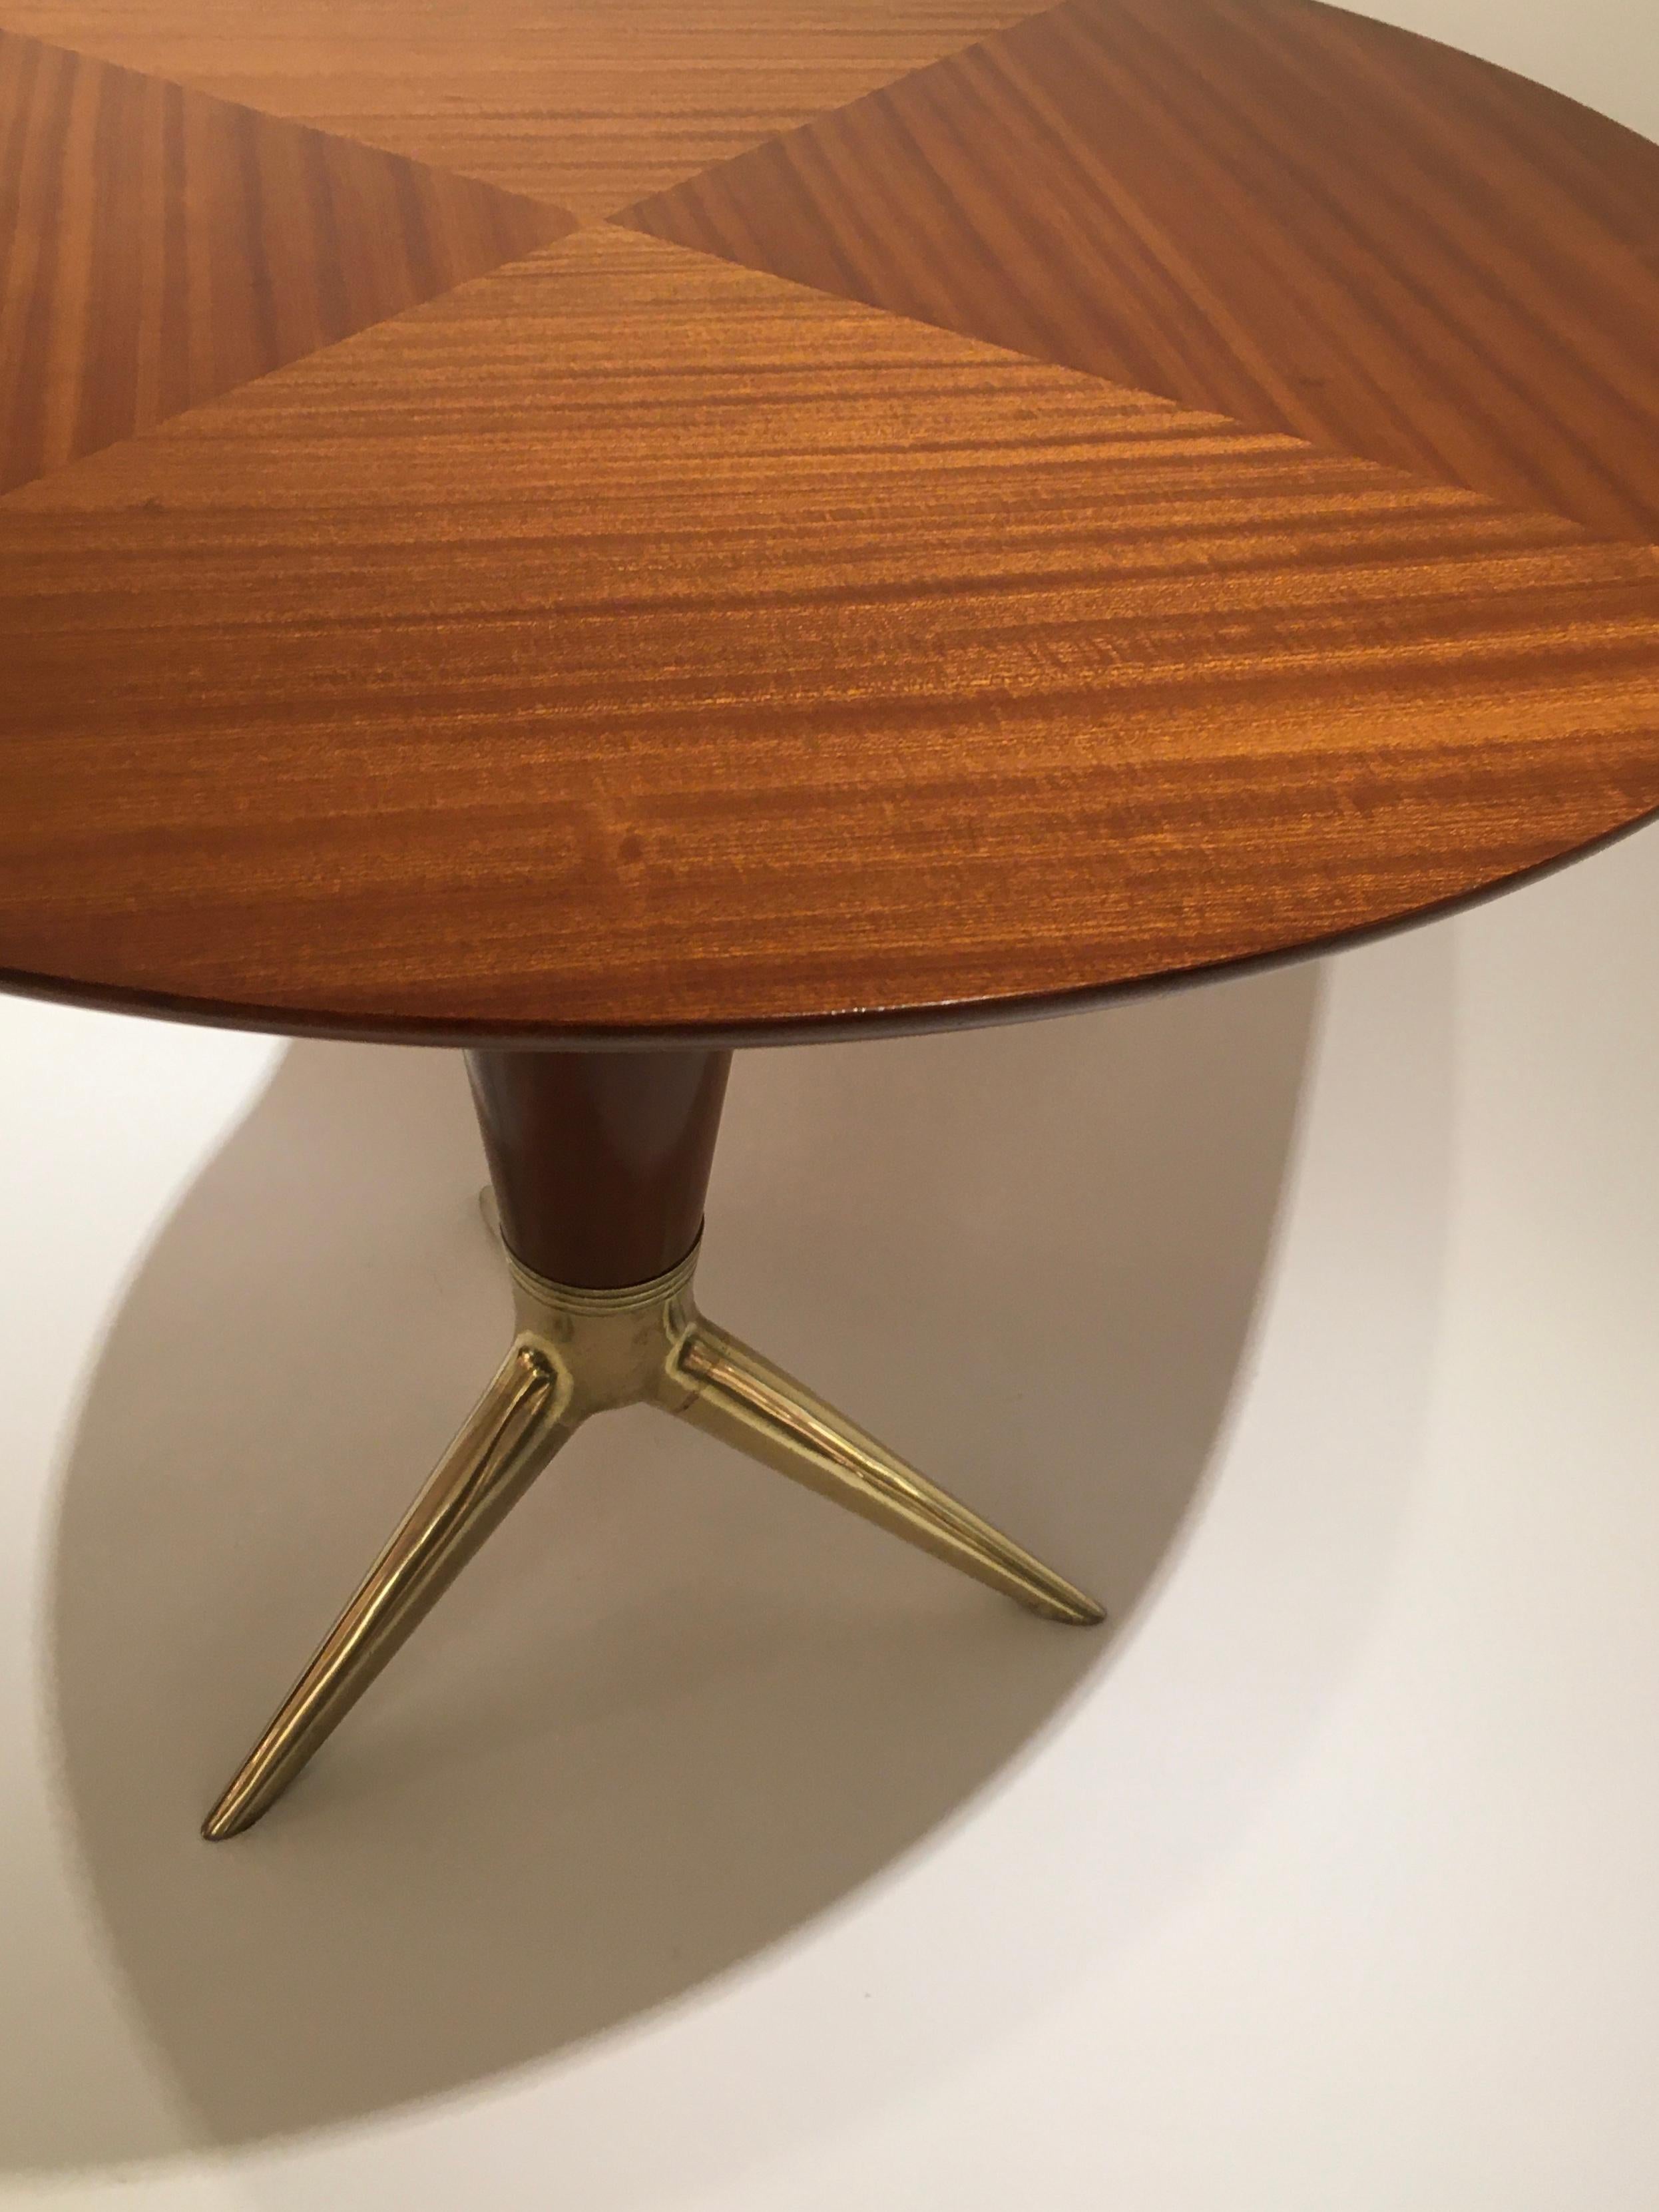 This beautiful circular walnut centre table, previously thought to be designed by Gio Ponti, was produced by the highly regarded Italian furniture company, I.S.A, circa 1950. This company was based in the northern Italian town of Bergamo, where they